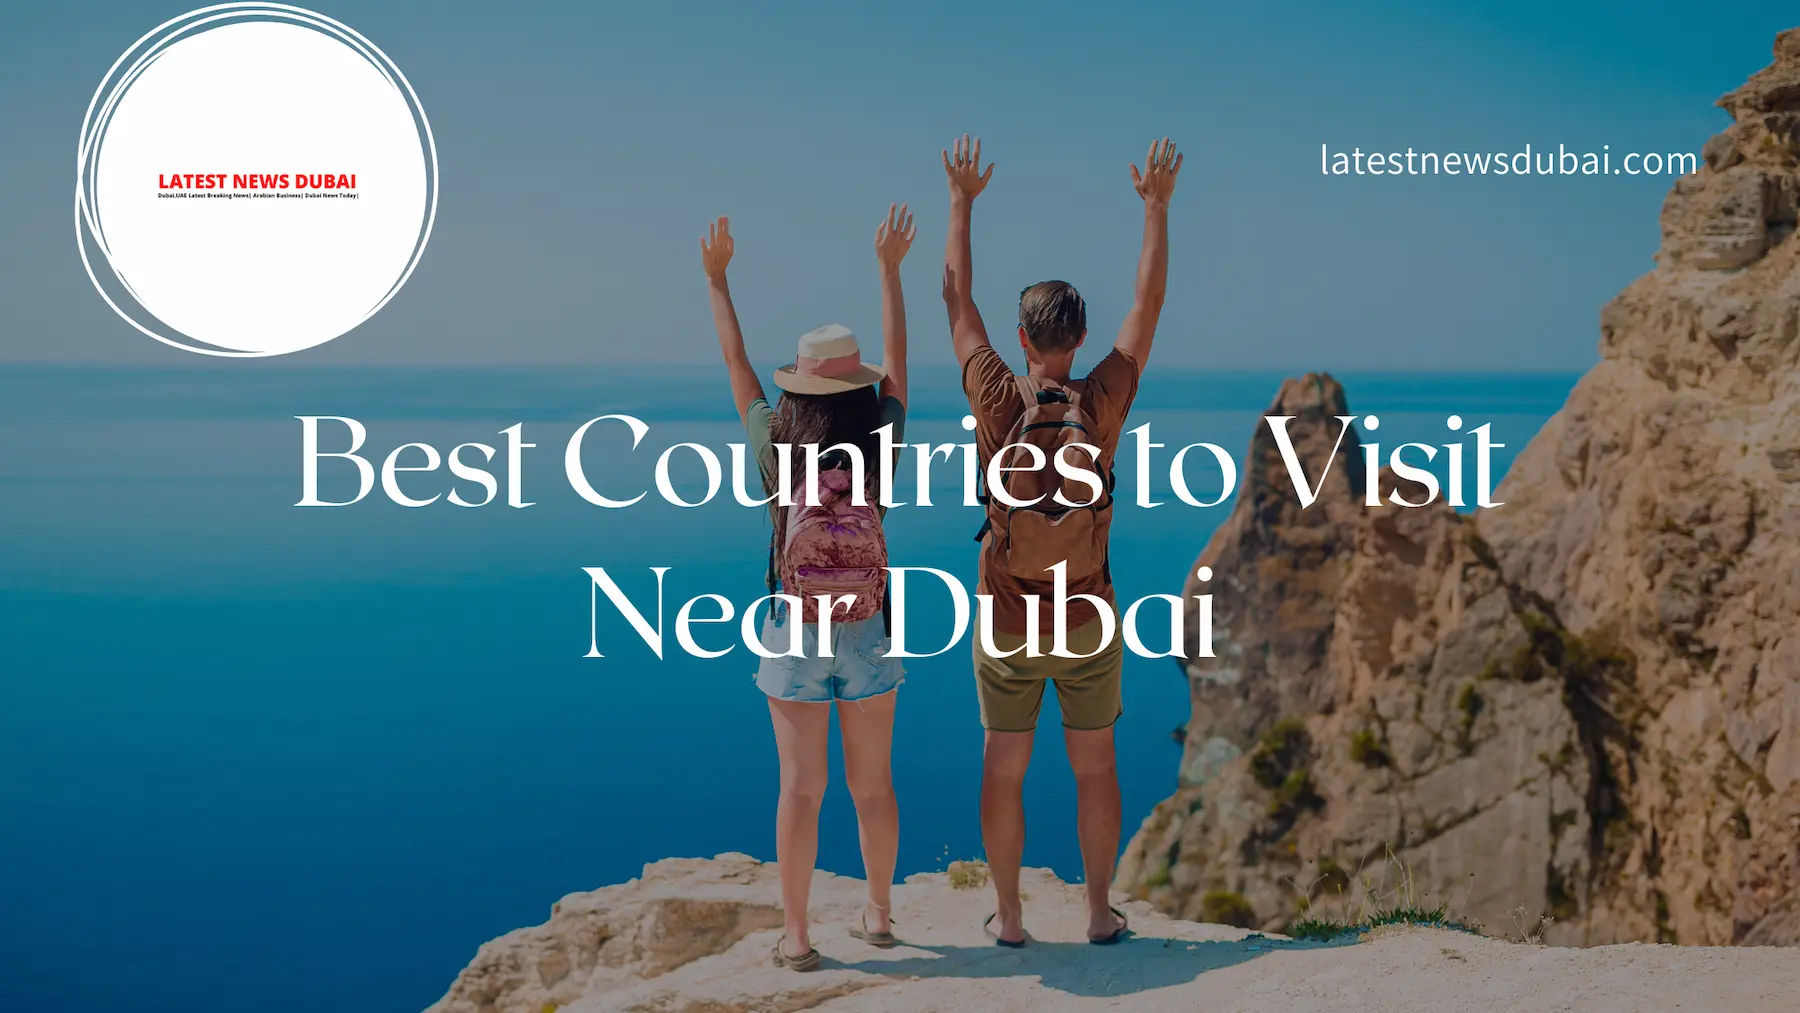 cheapest country to visit near dubai